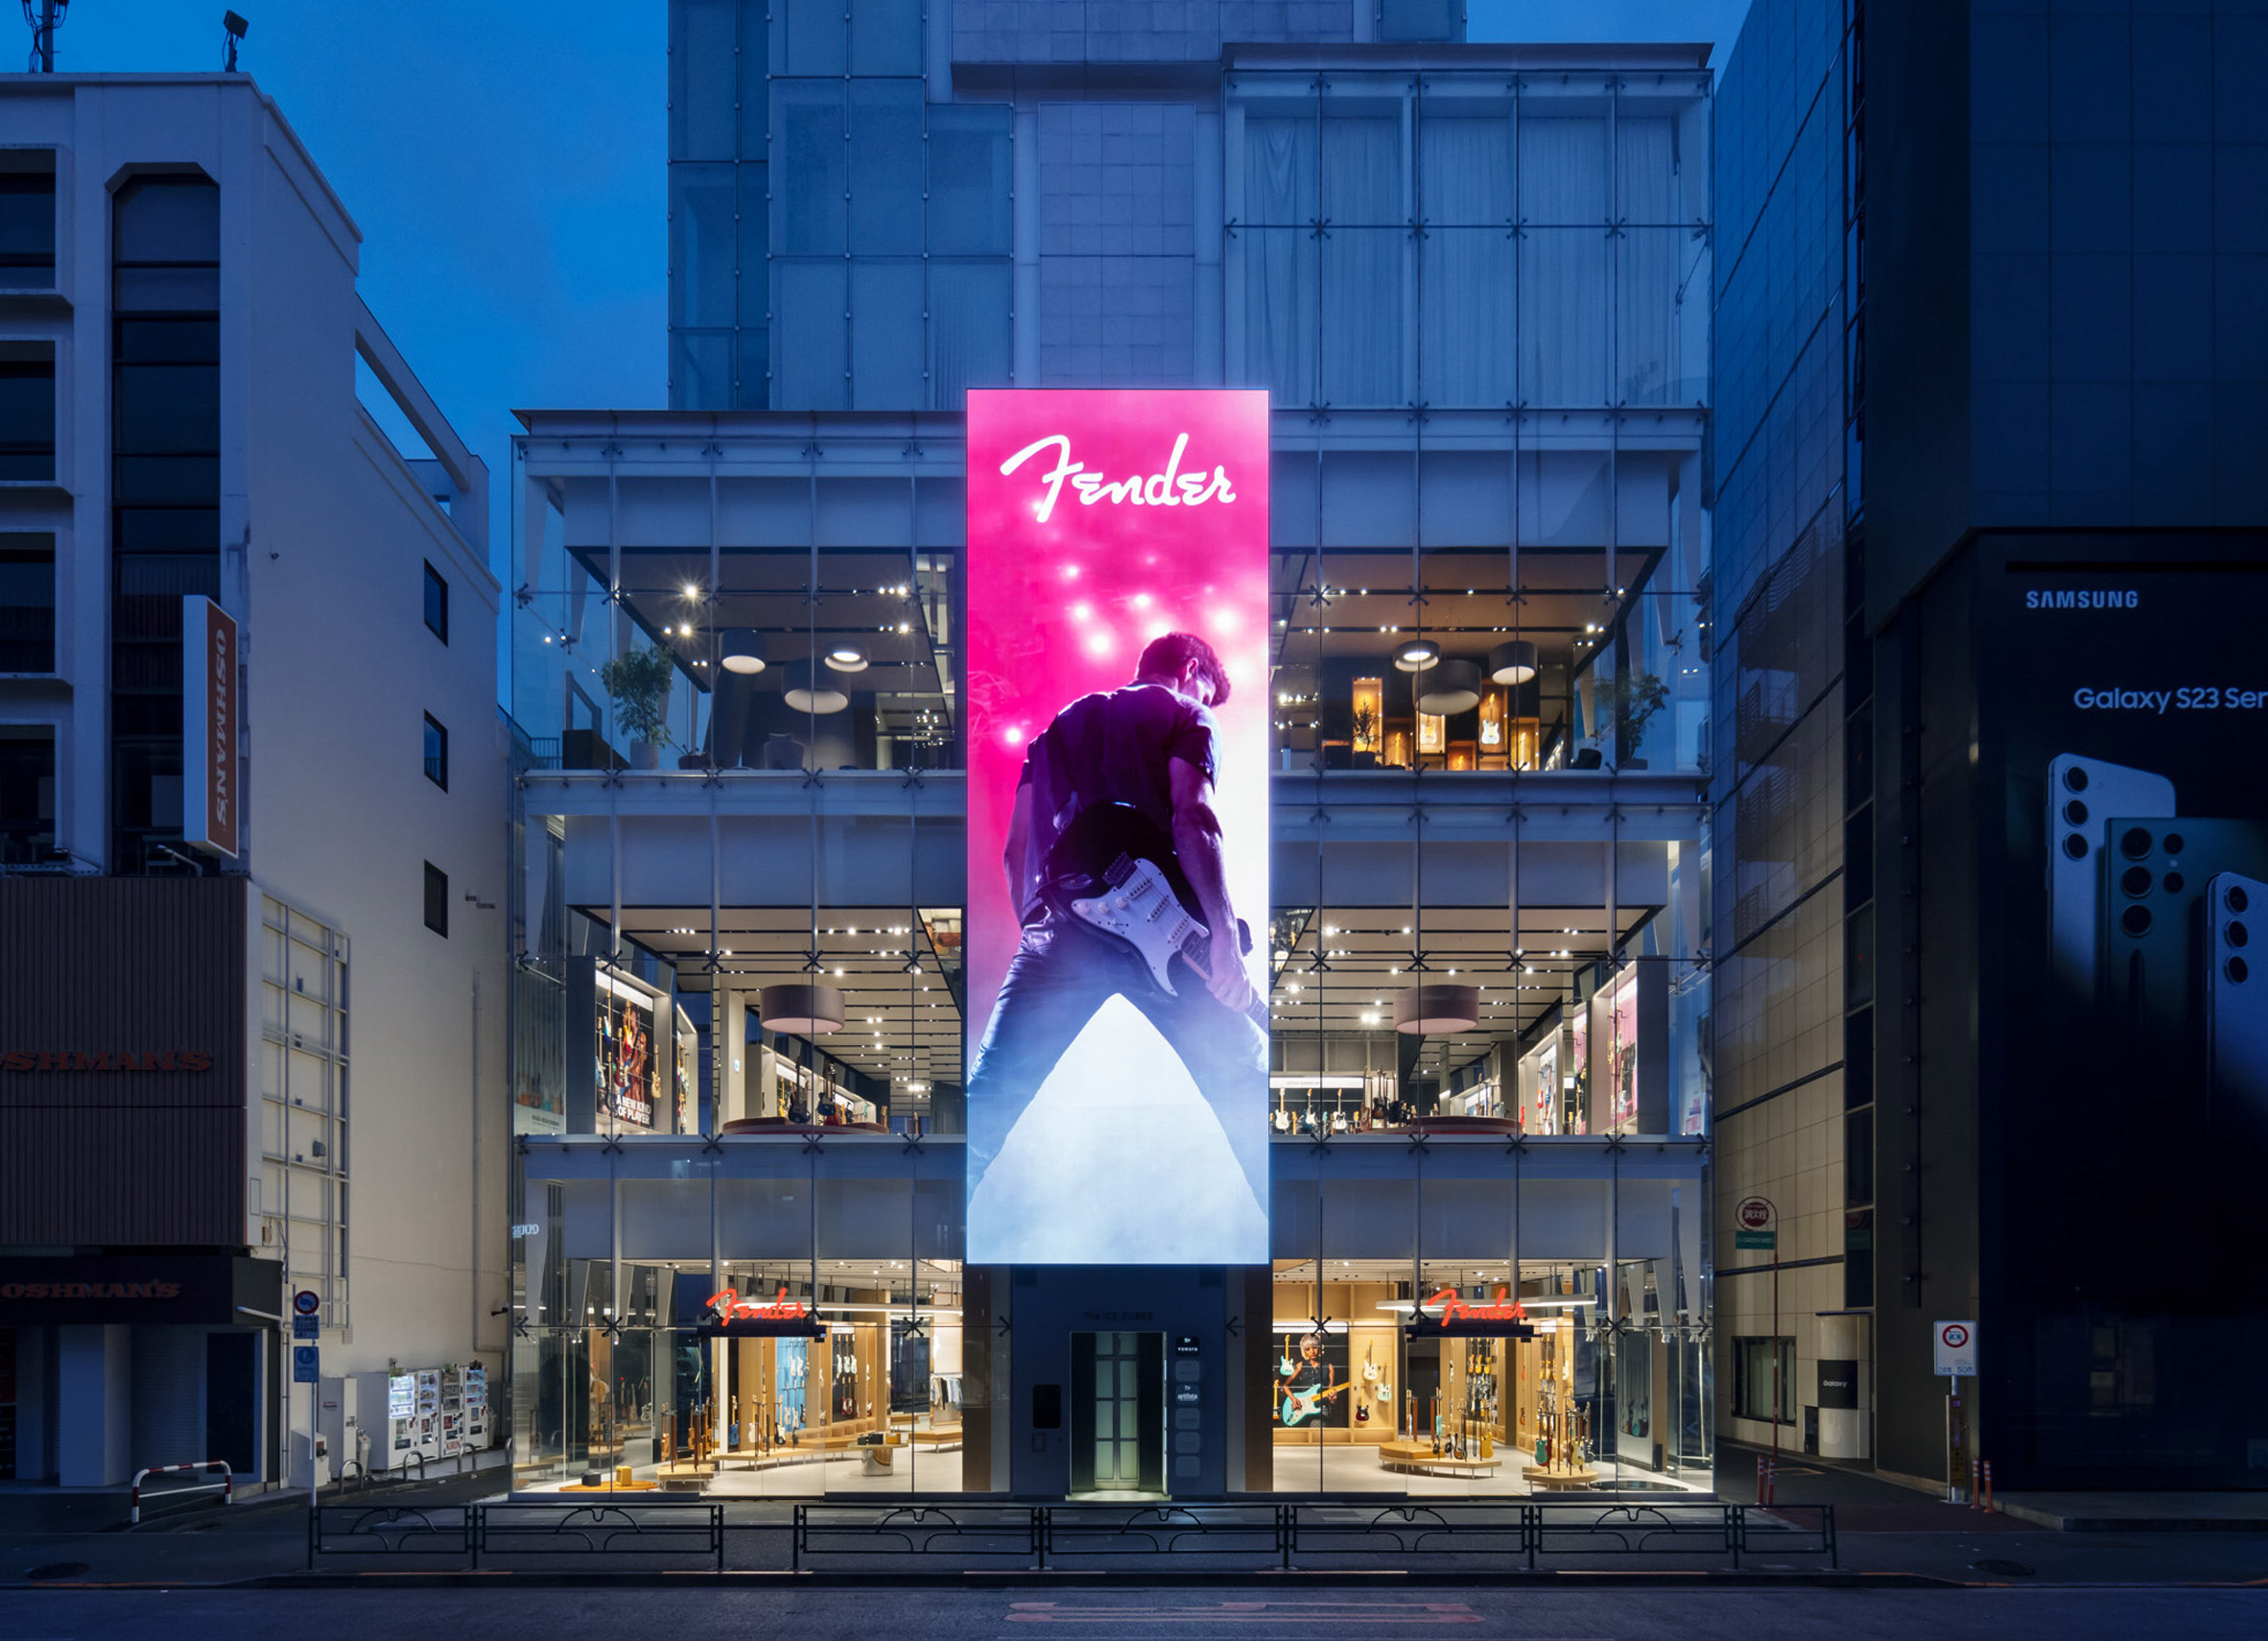 Photo of the exterior of the Fender flagship store, showing the outside of the "Ice Cubes" building in Tokyo with a vertical LED billboard displaying a musician posing with their electric guitar